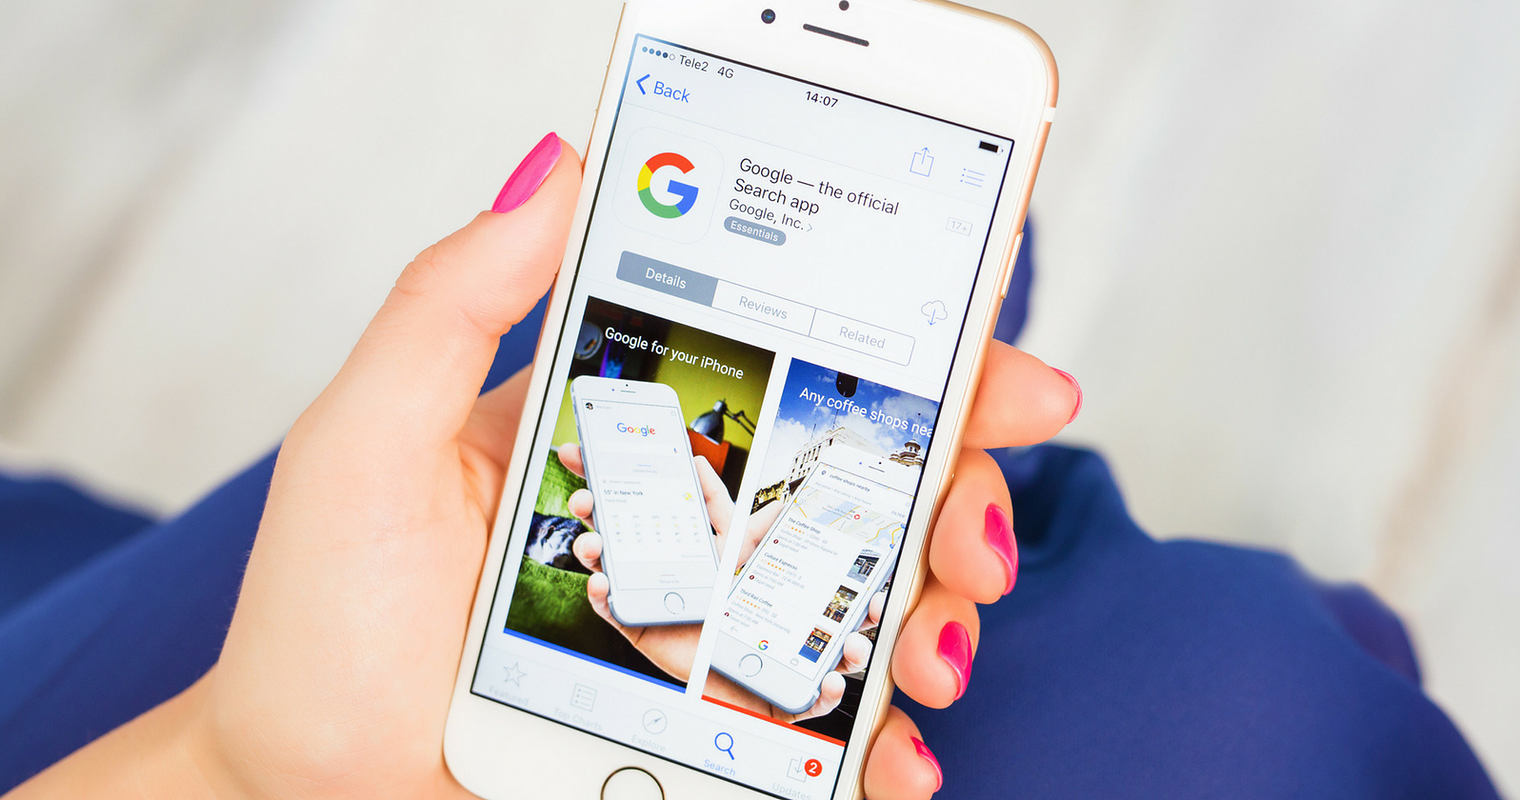 Google’s iOS App Returning Accelerated Mobile Pages (AMPs) in Search Results